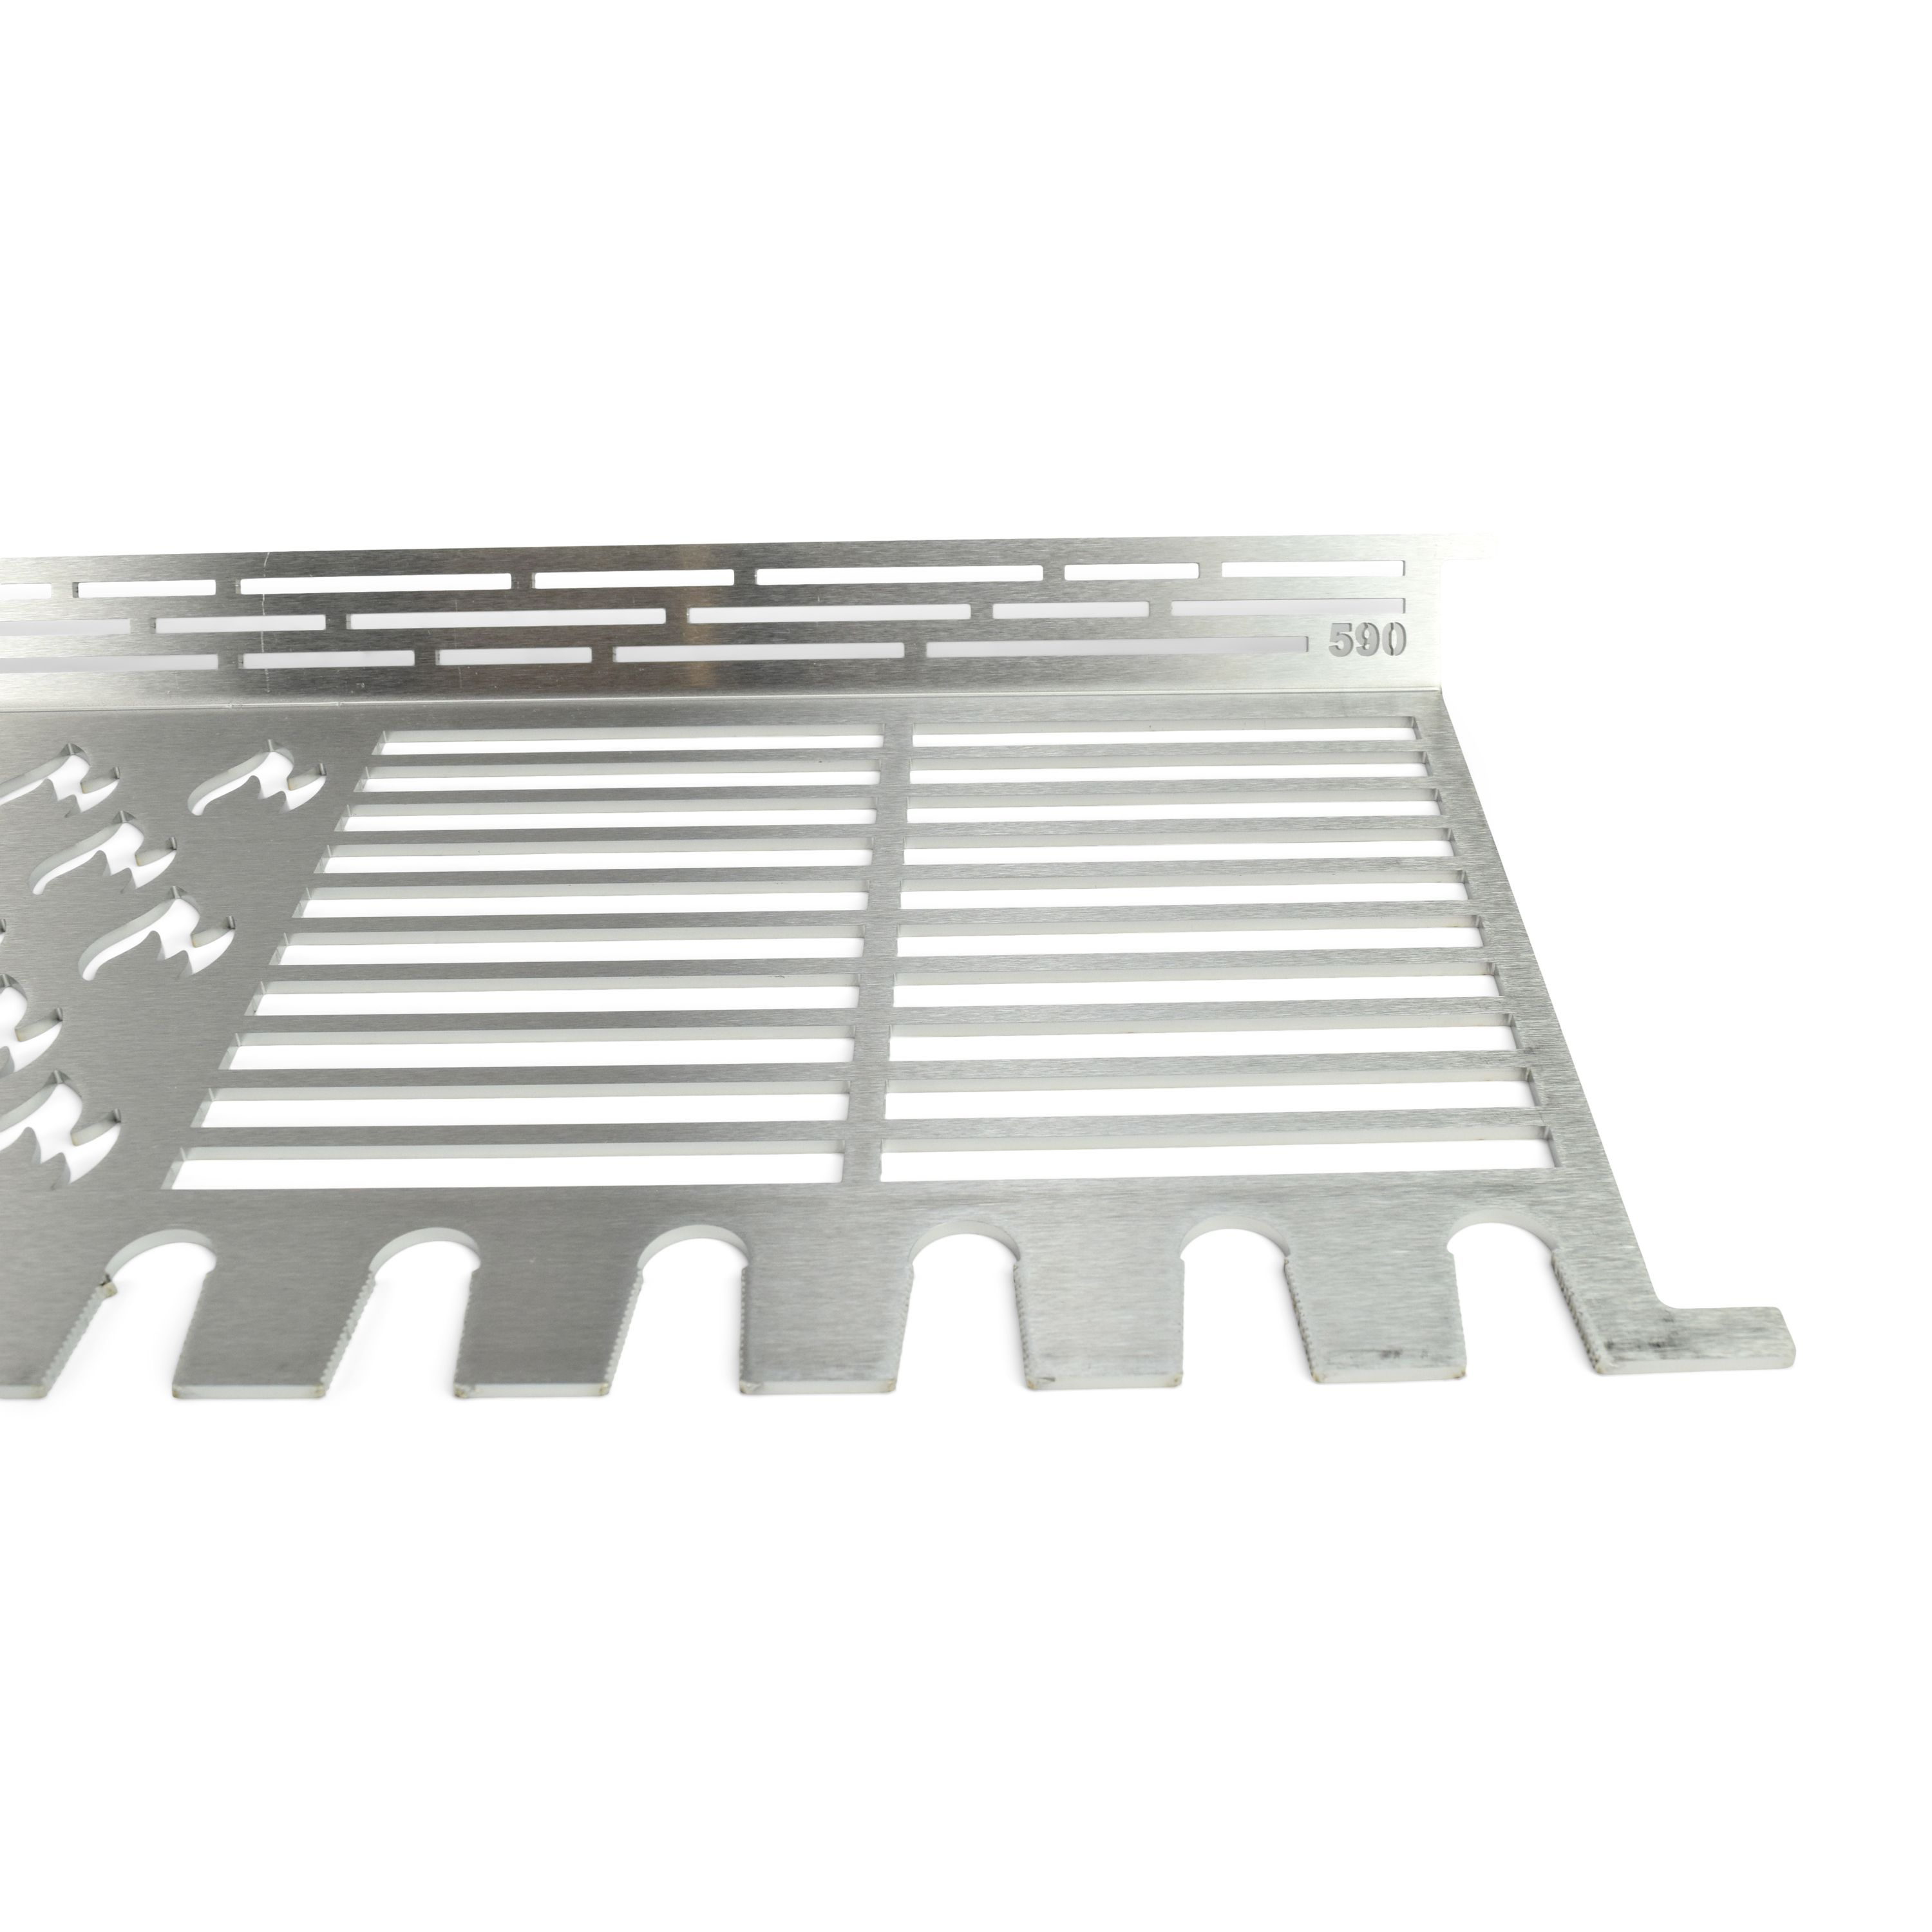 Stainless steel MultiStation for Broil King Baron Regal Imperial 520 590 - Hot Grate